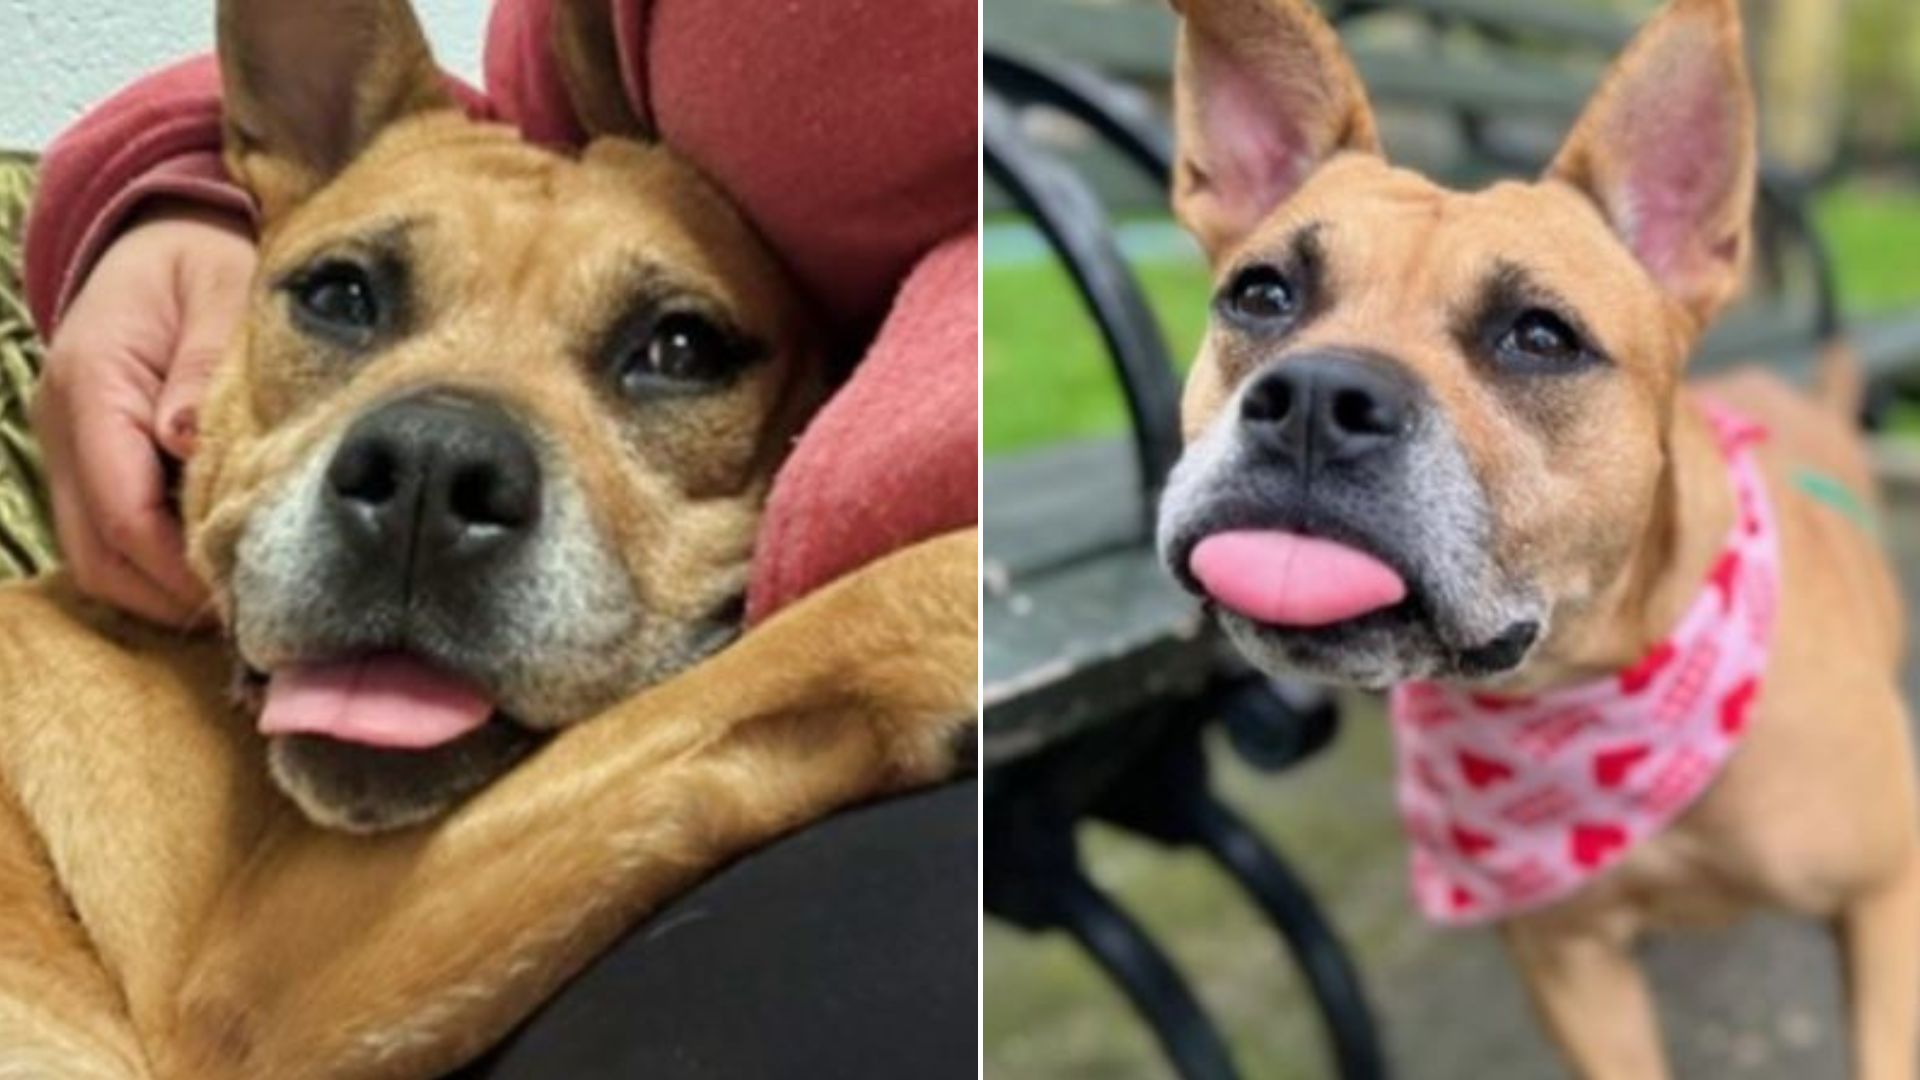 This Sweet Smiling Dog Has Spent Over 200 Days In The Shelter Waiting For A New Family